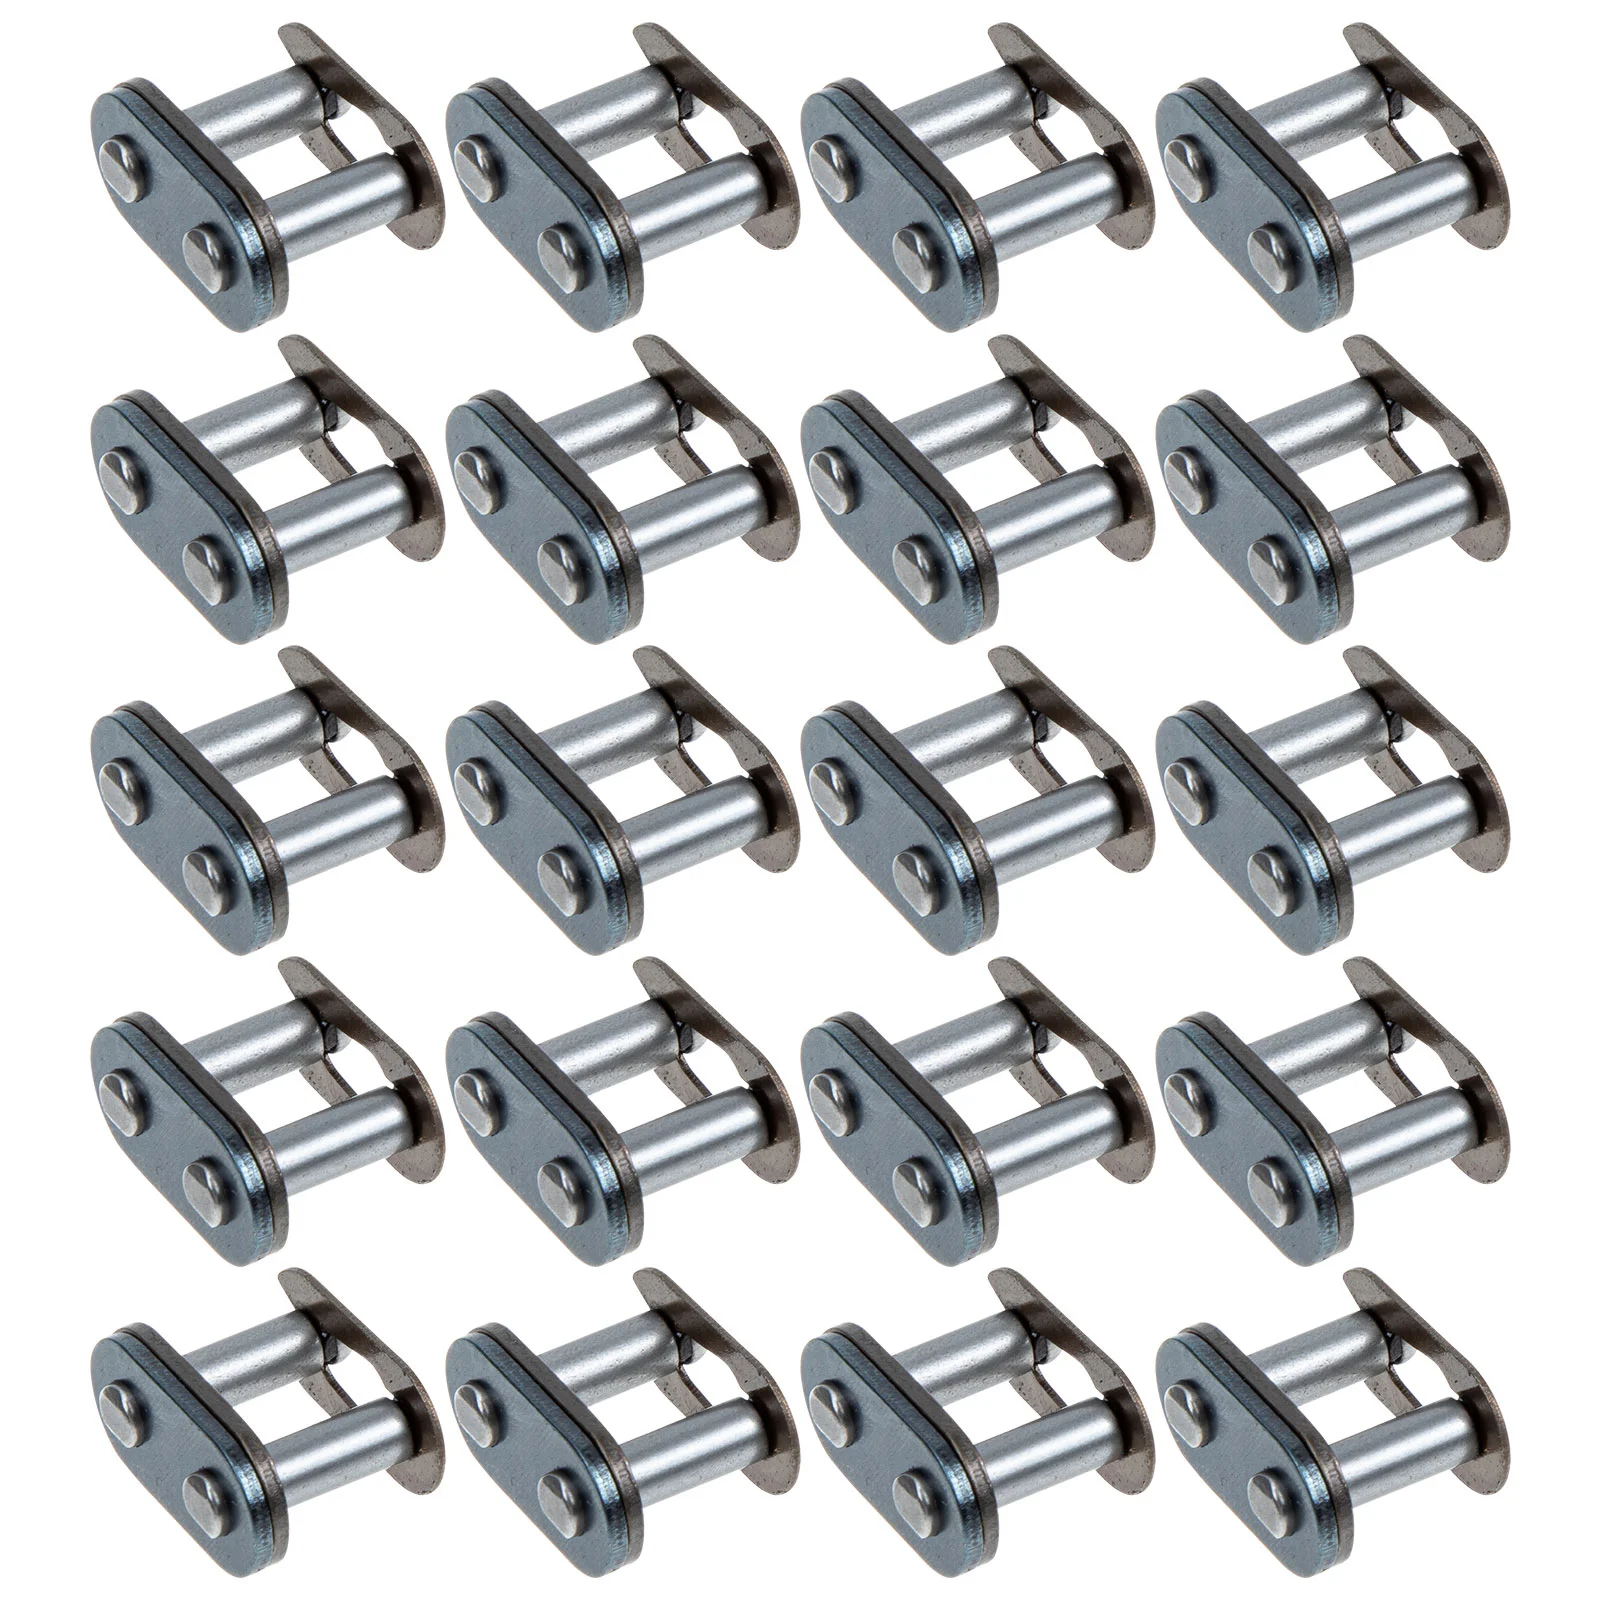 

20 Pcs Motorcycle Chain Buckle Steel Link Mini Bike Accessories Bicycle Roller Quick Release Standard Connecting Links Off-road